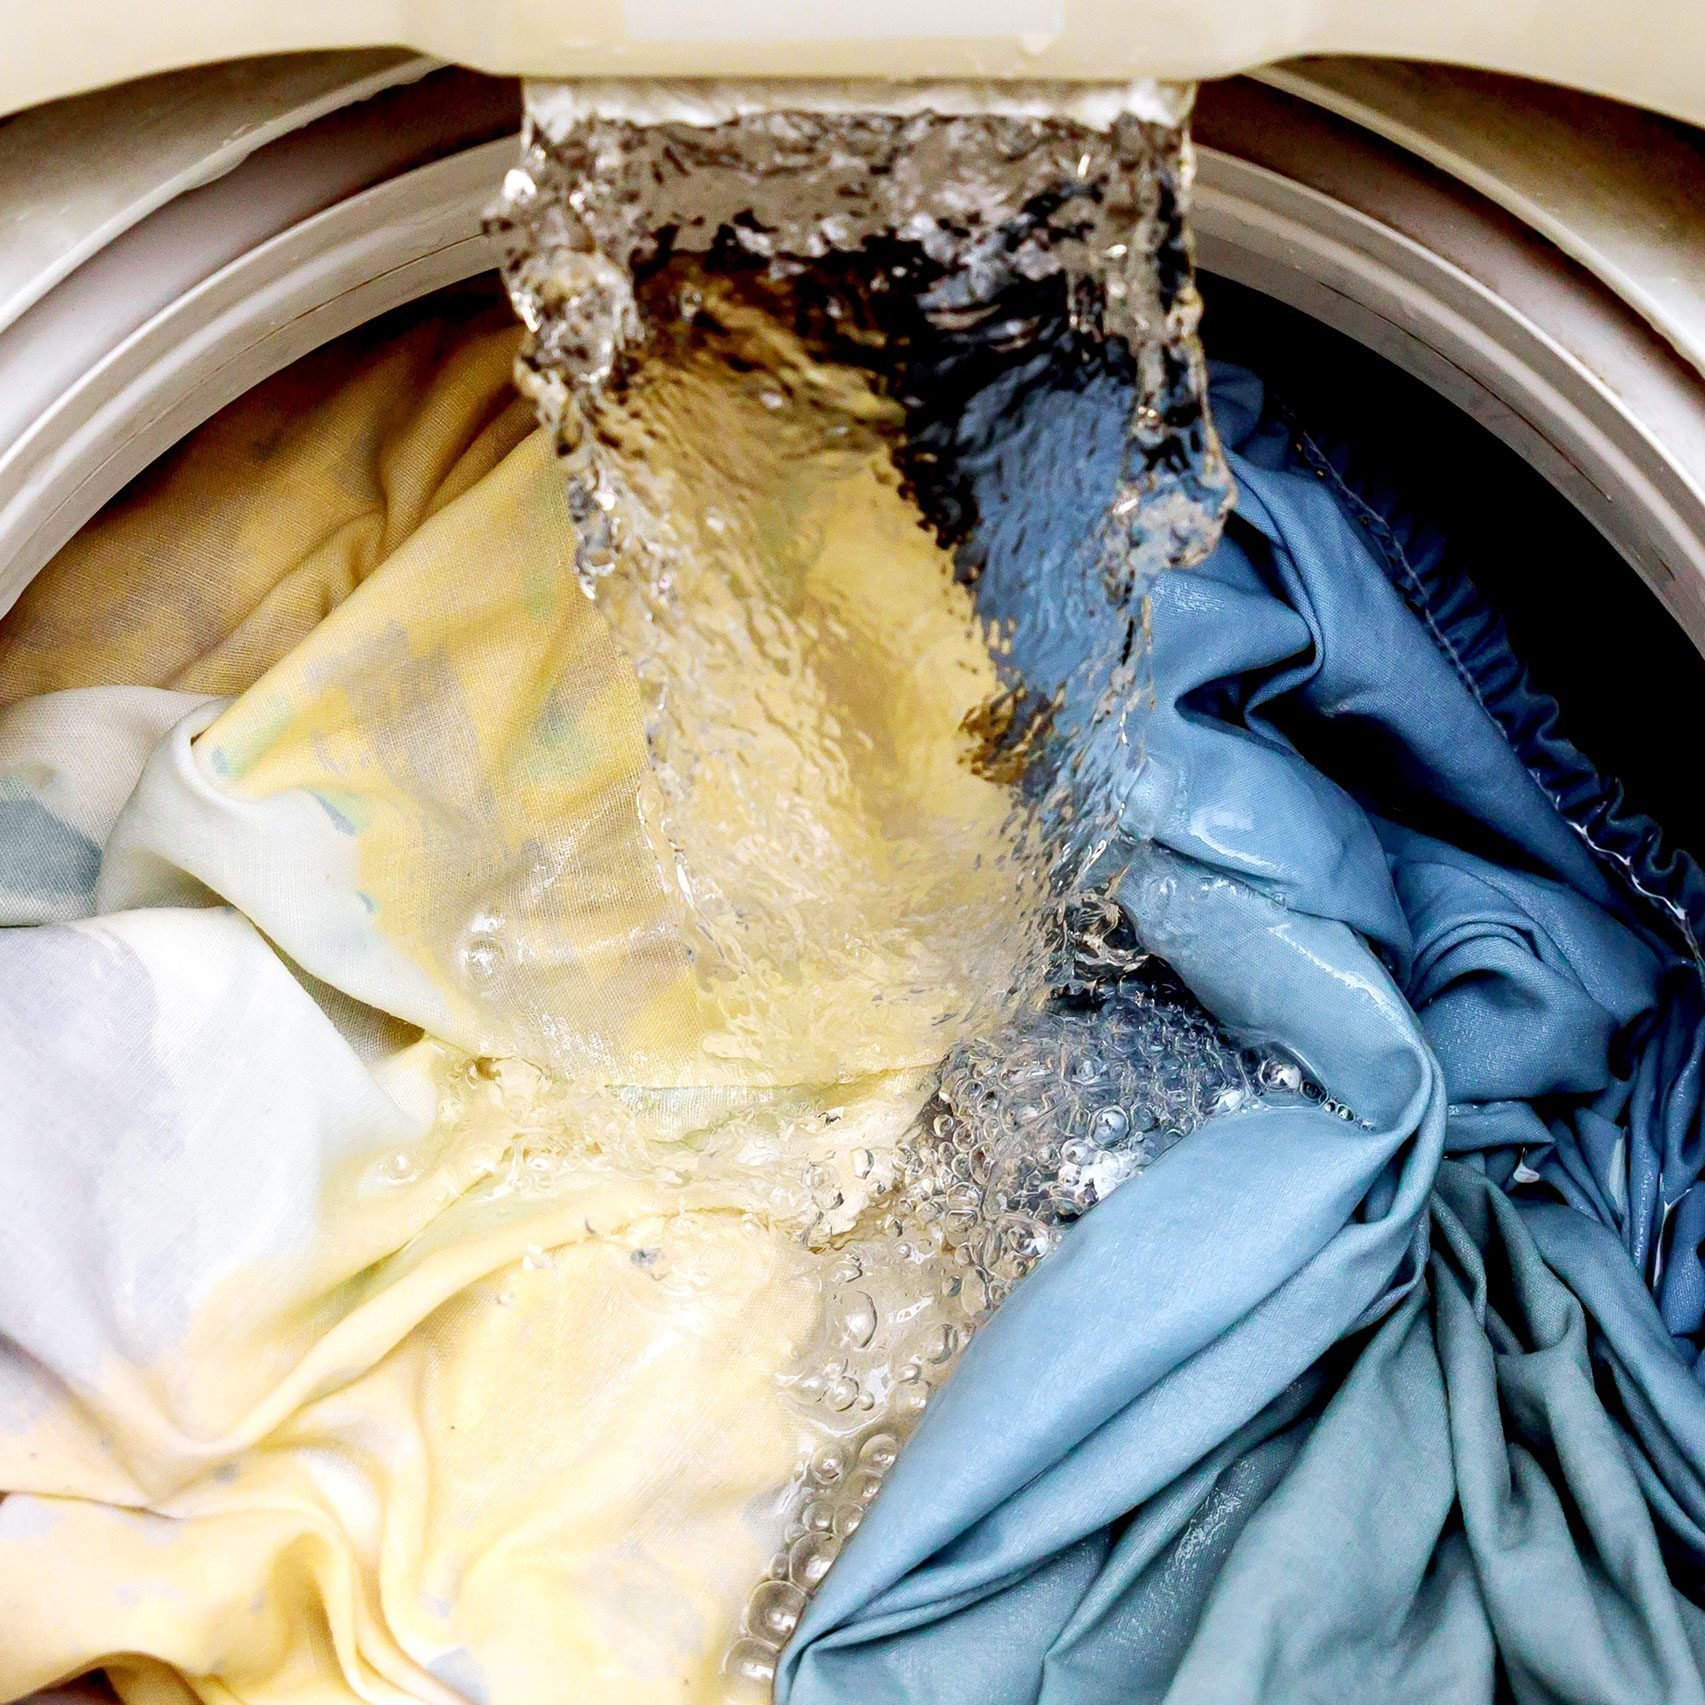 Refresh your dirty laundry routine